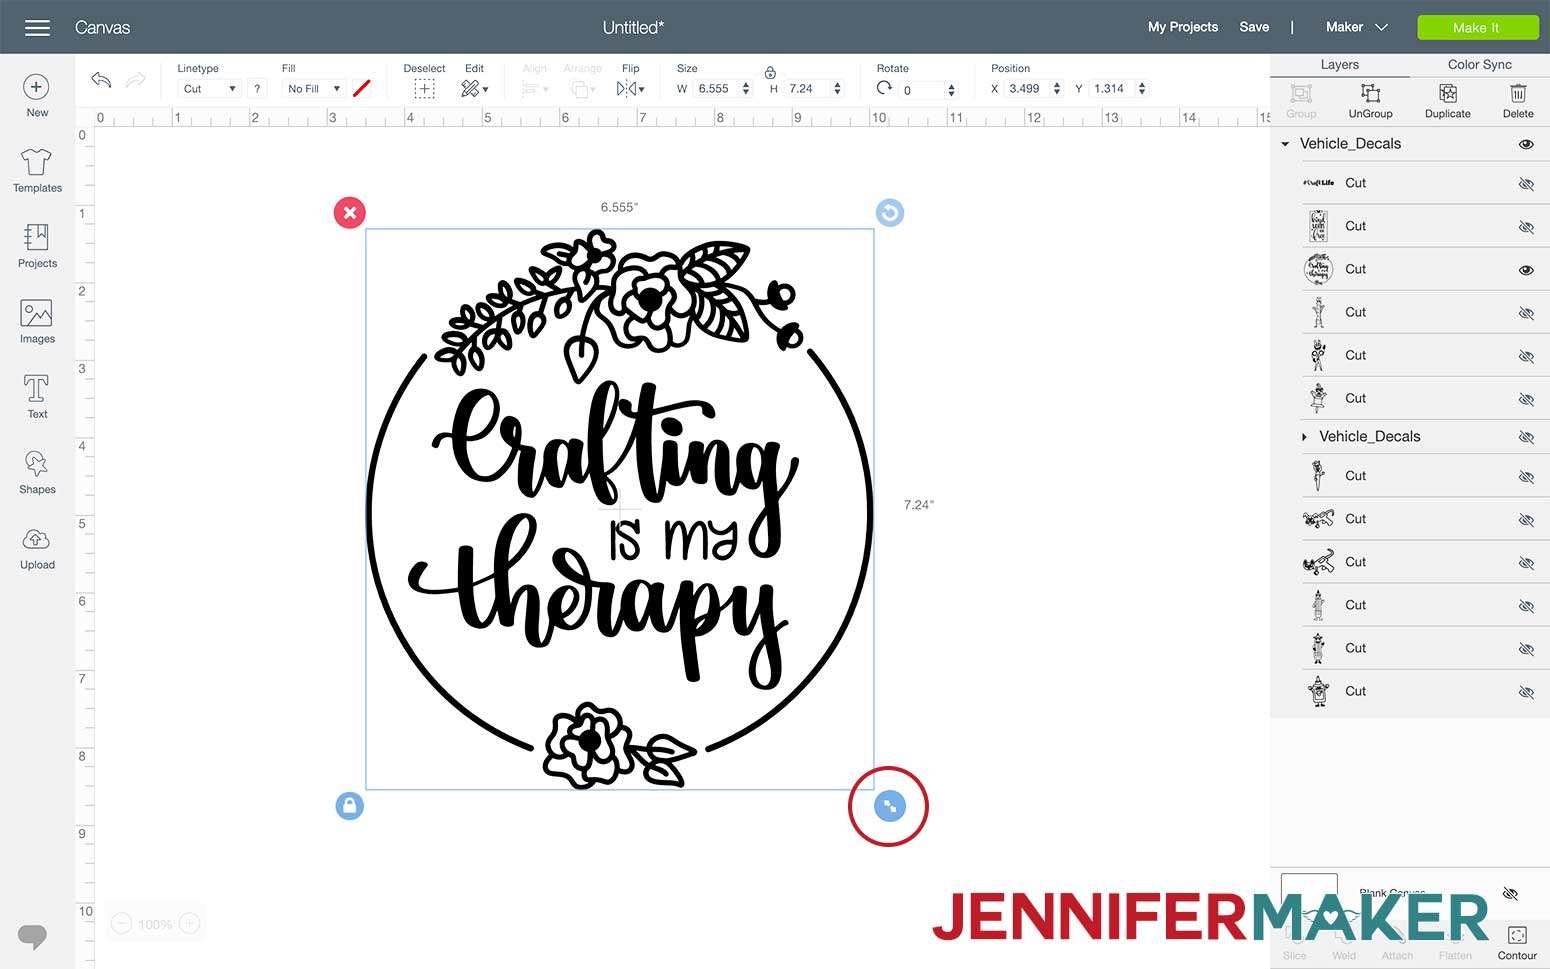 Download Vinyl Car Decals Quick And Easy To Make Your Own Jennifer Maker